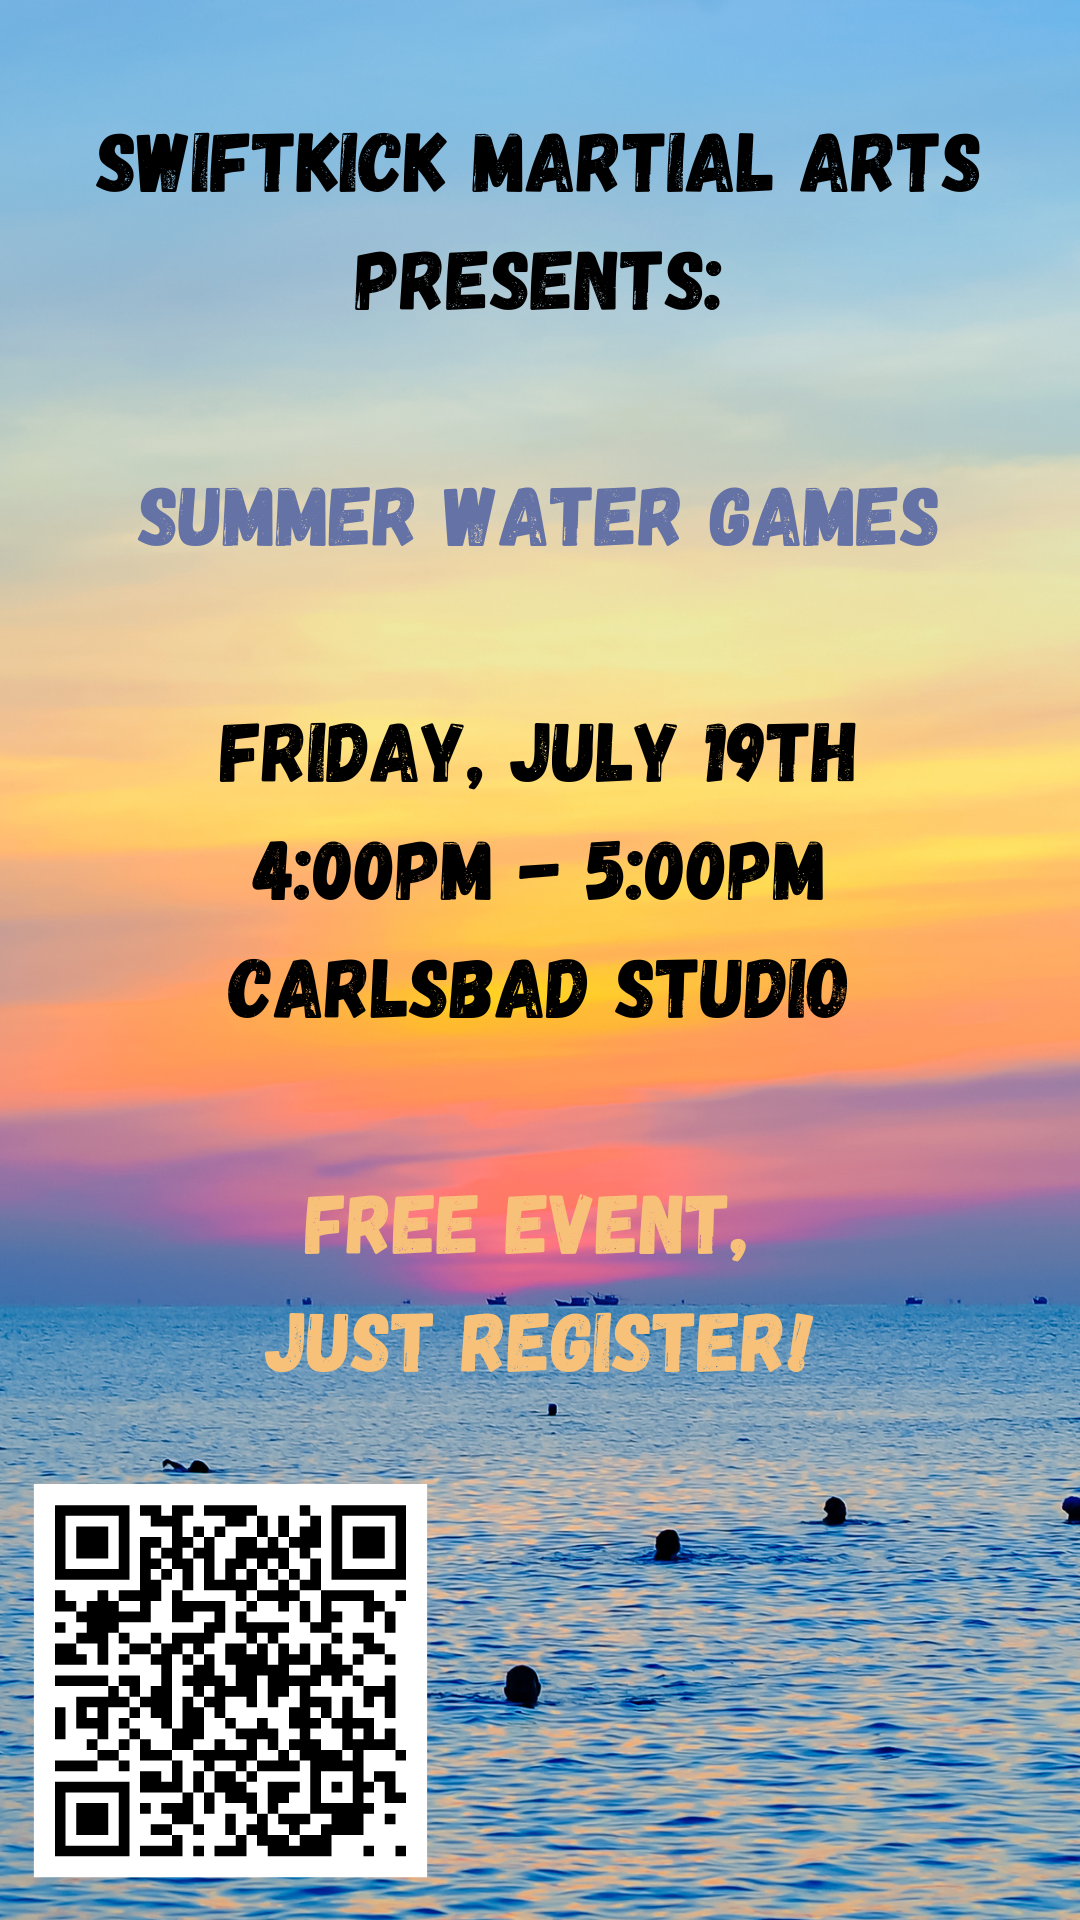 Poster of martial art studio's water game event.